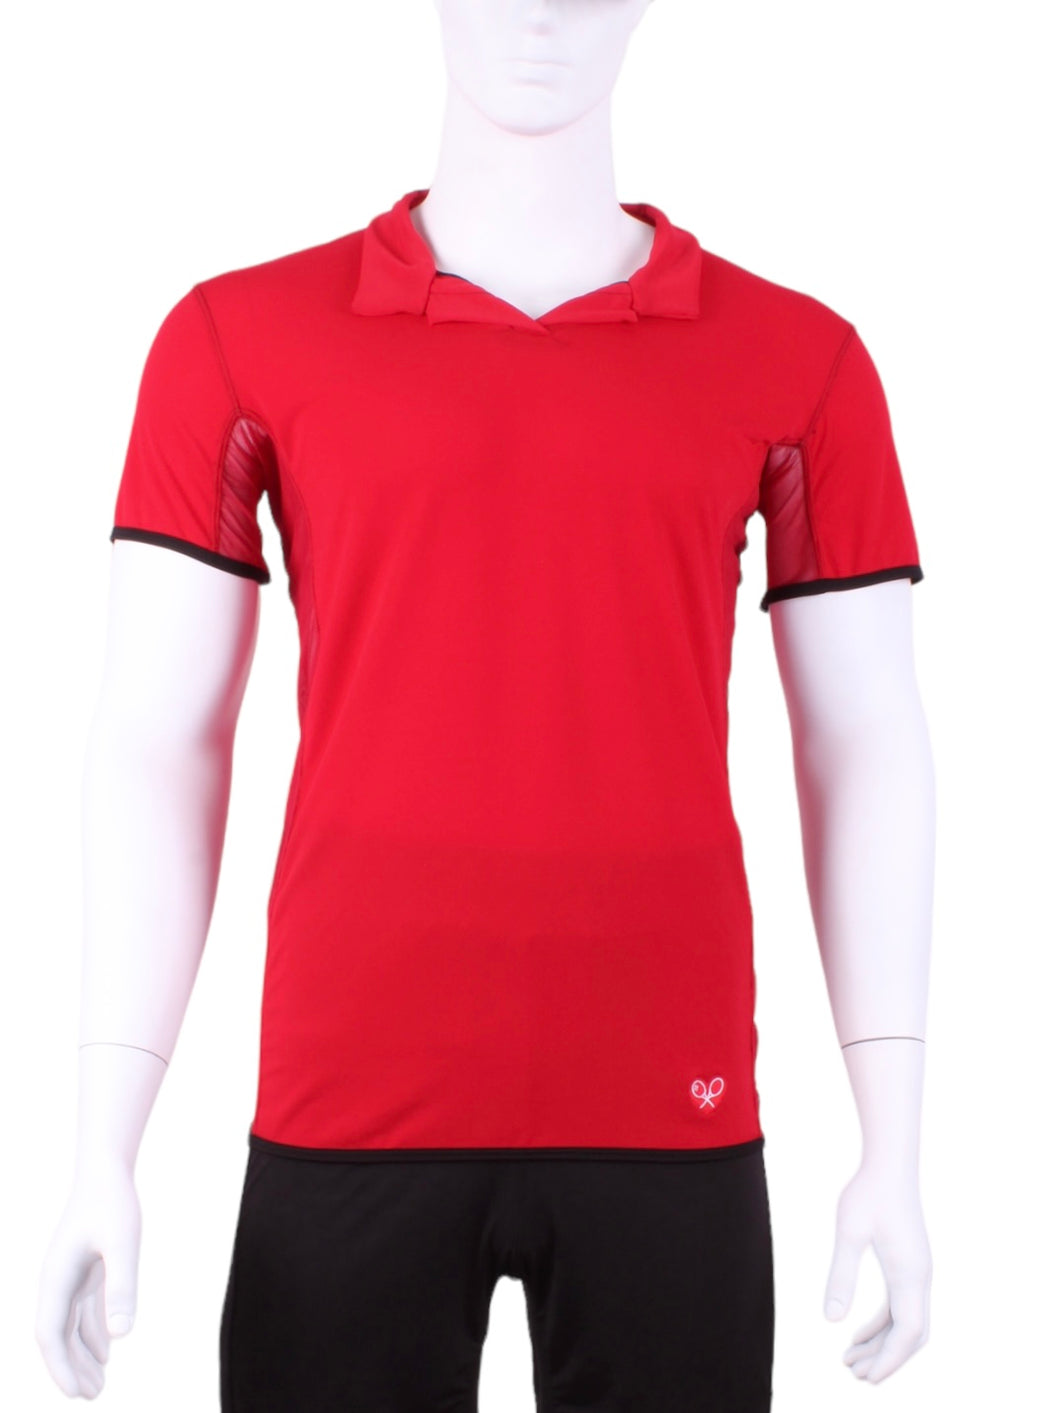 New for 2022 - Stay cool on the court with our new men's original Polo Shirt. It is super soft and has light mesh on the sides so your body can breath while playing. 